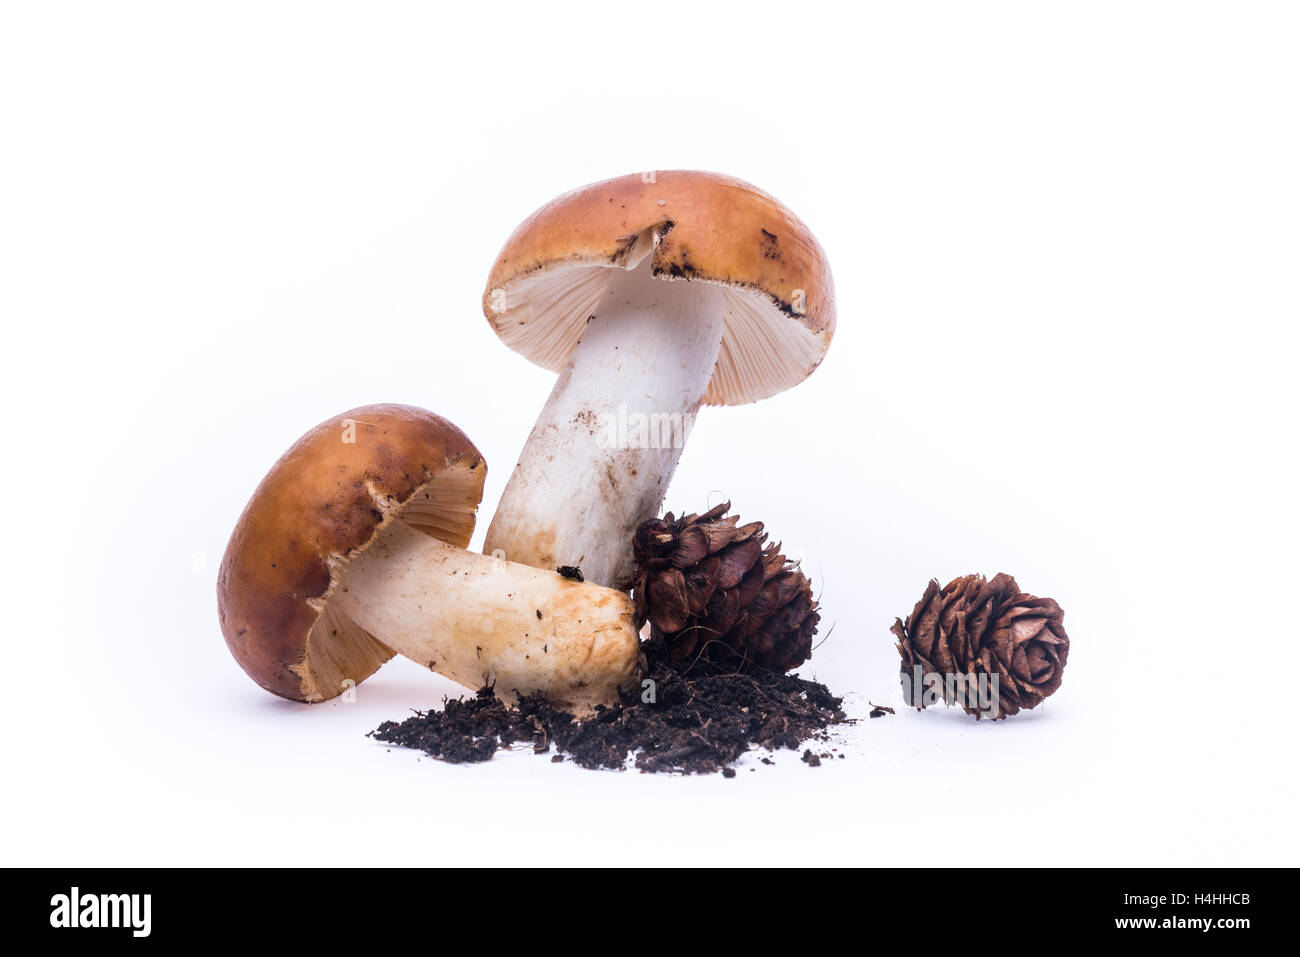 Wild russula mushrooms on white background with pine cones Stock Photo